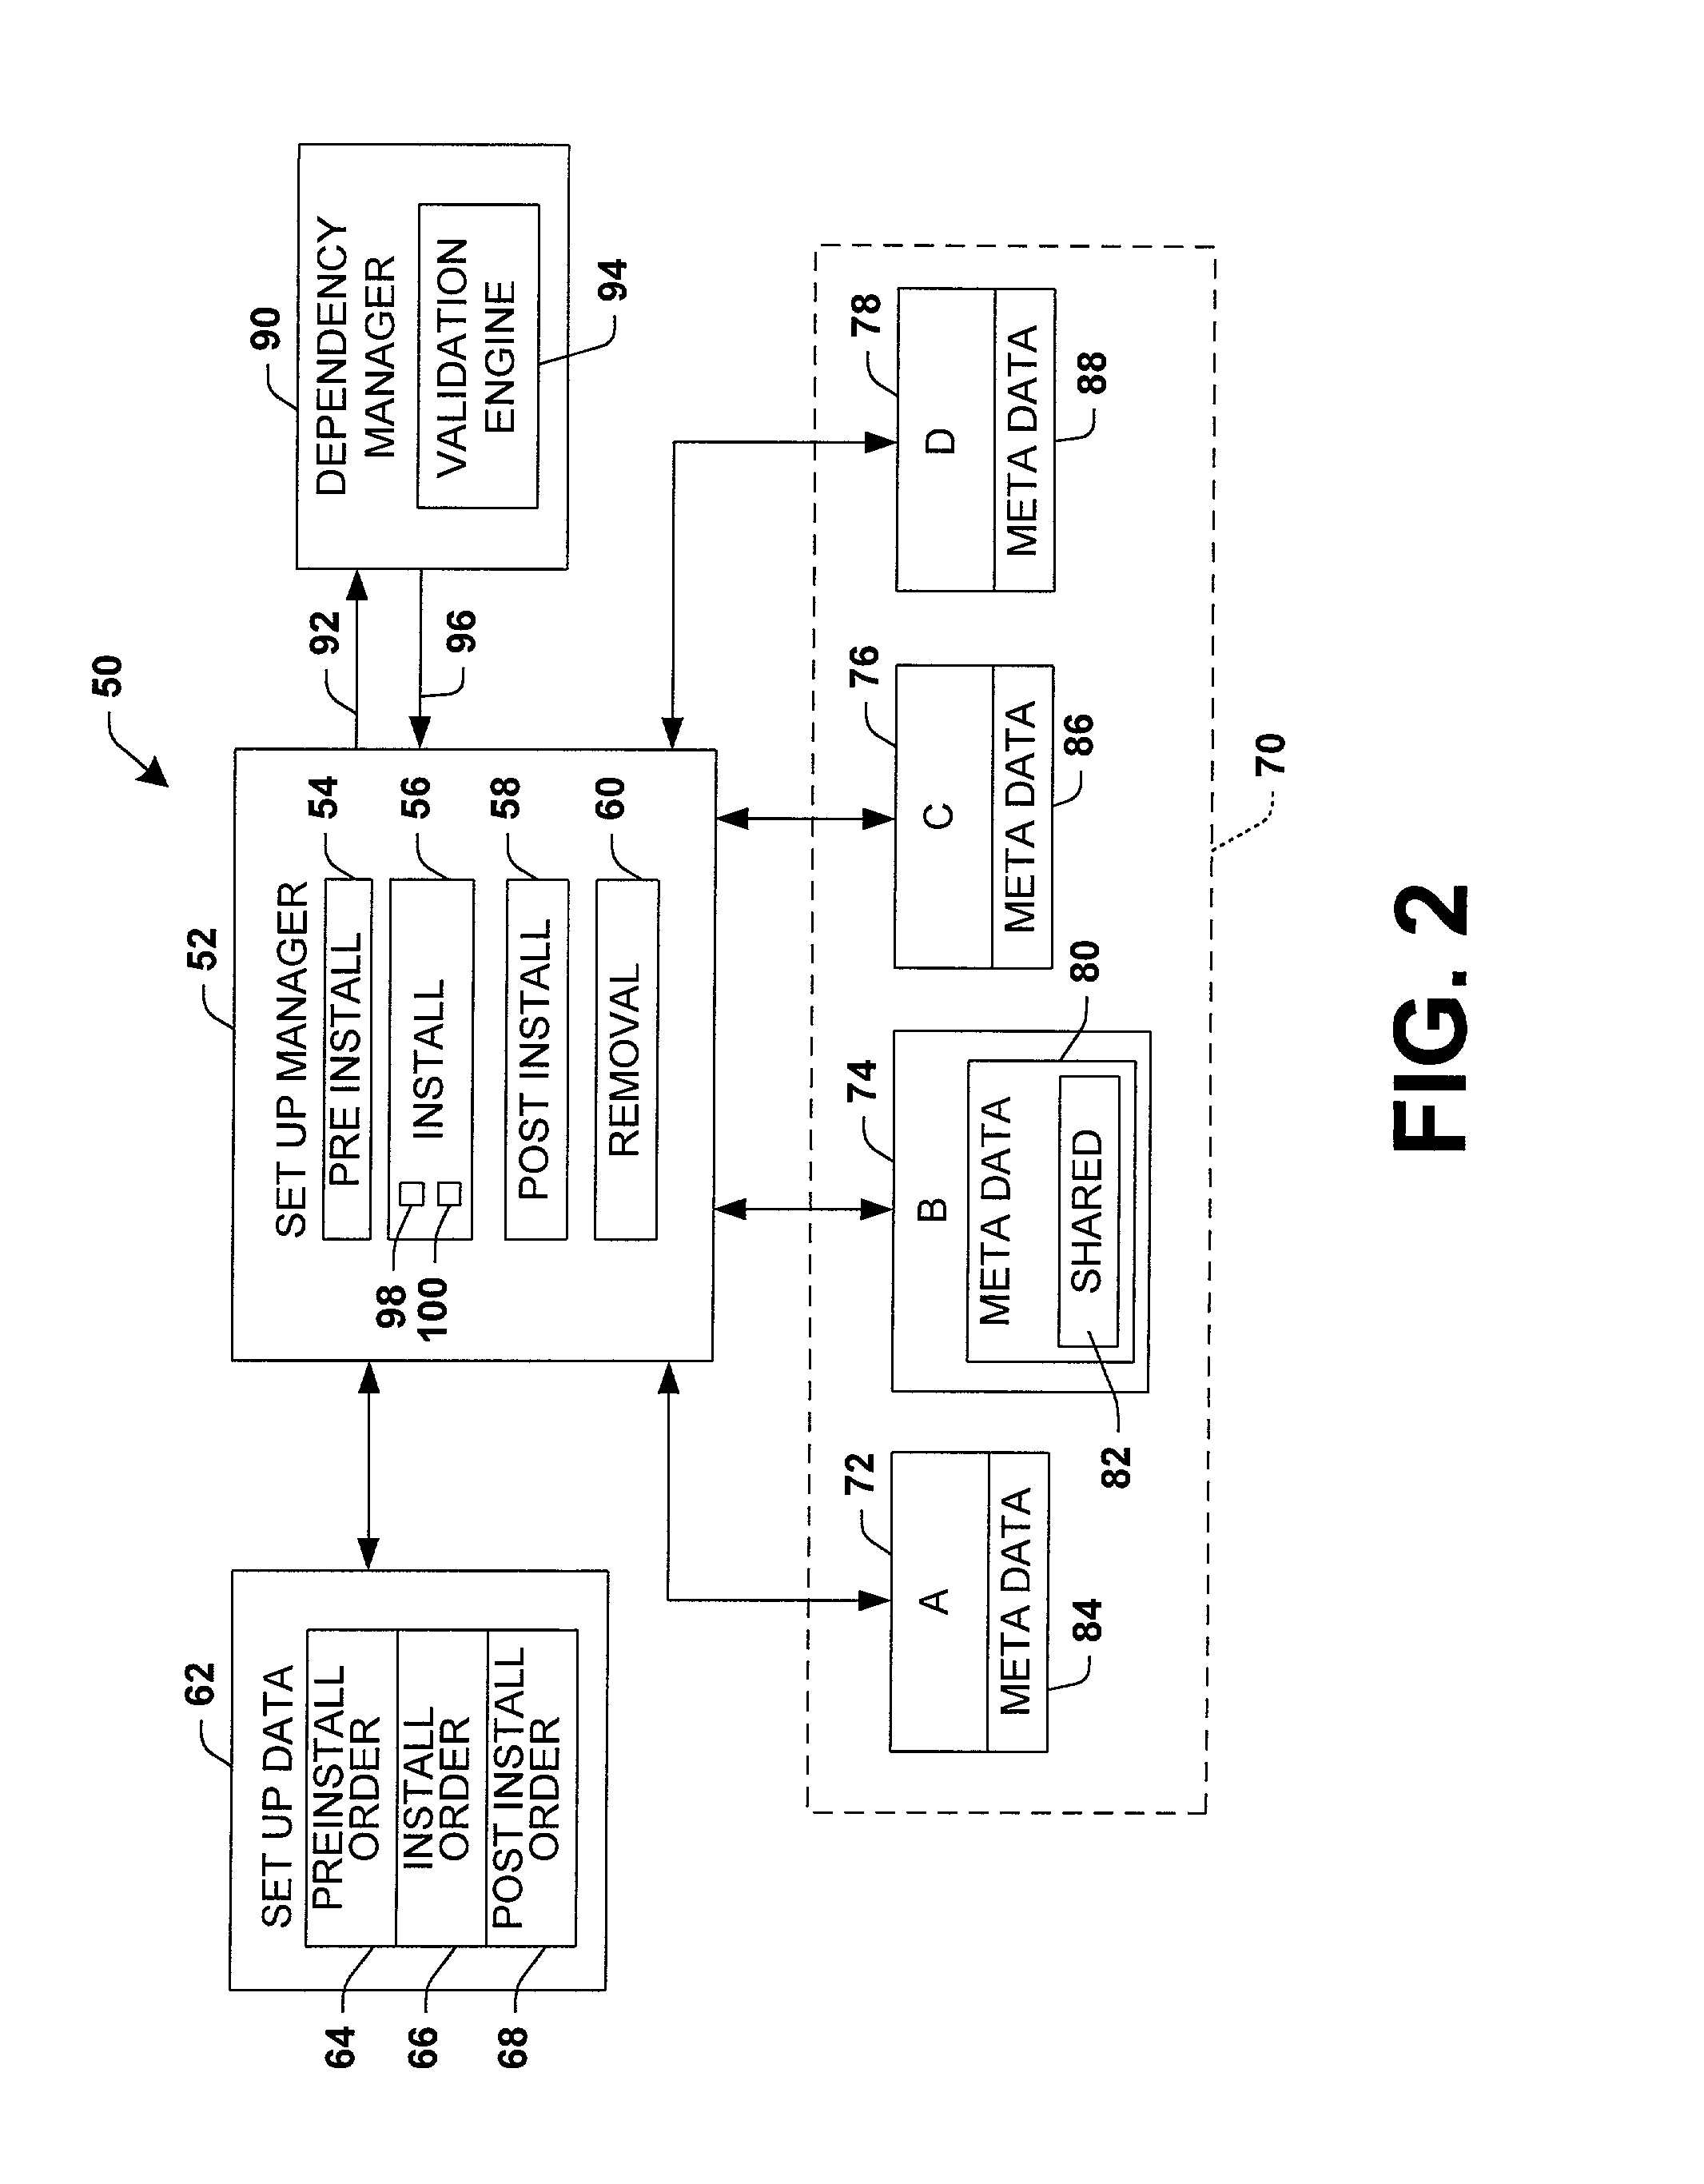 System and method to facilitate installation and/or removal of components